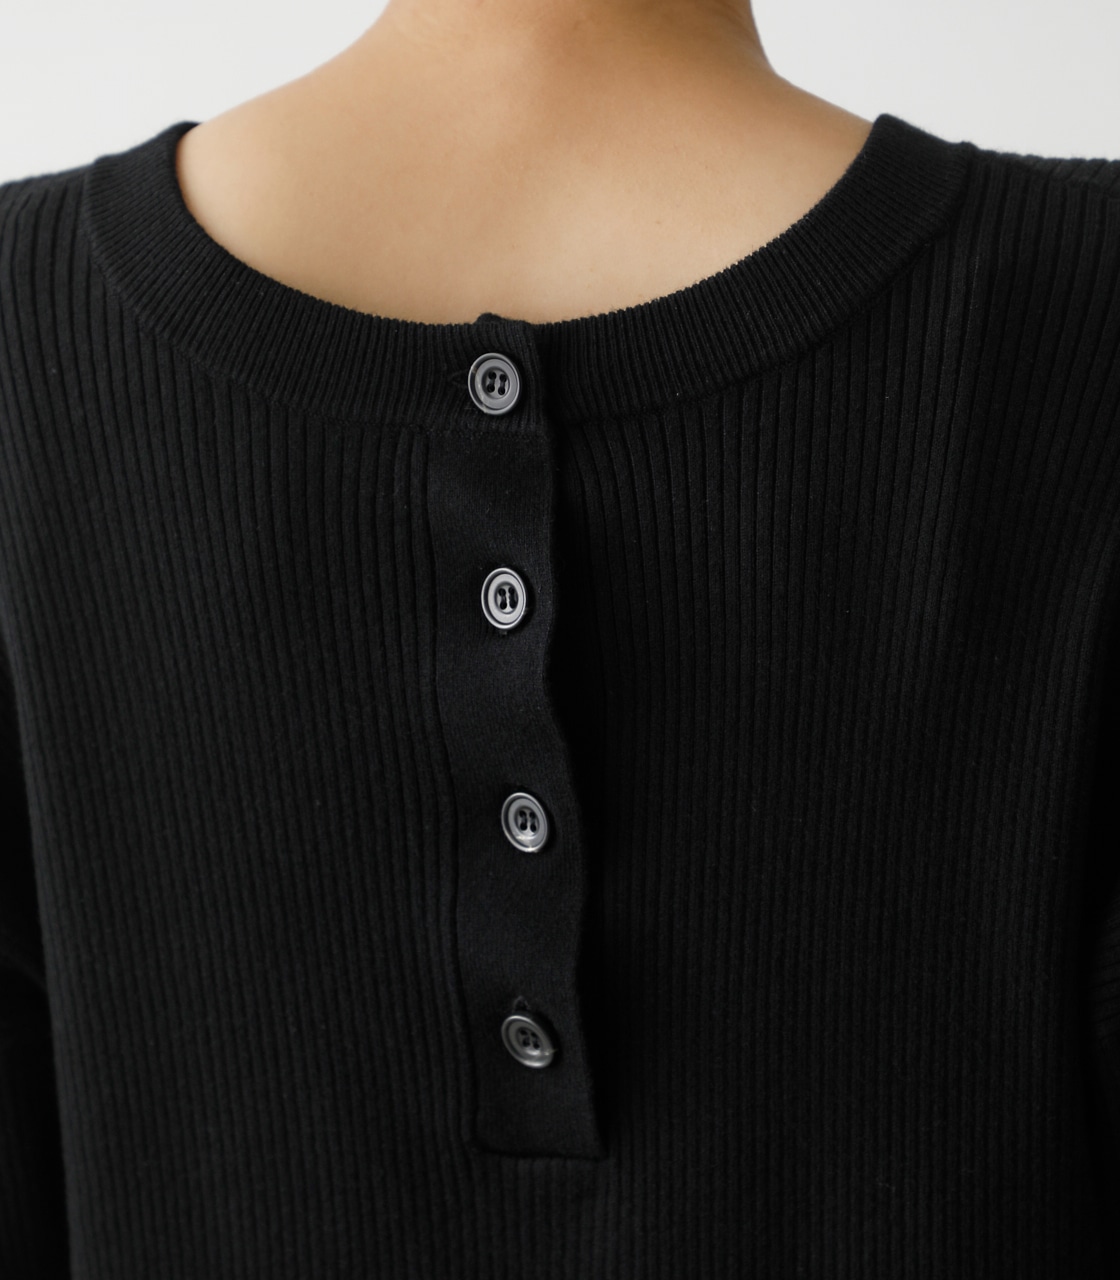 2WAY RIB KNIT LONG TOPS/2WAYリブニットロングトップス 詳細画像 BLK 9